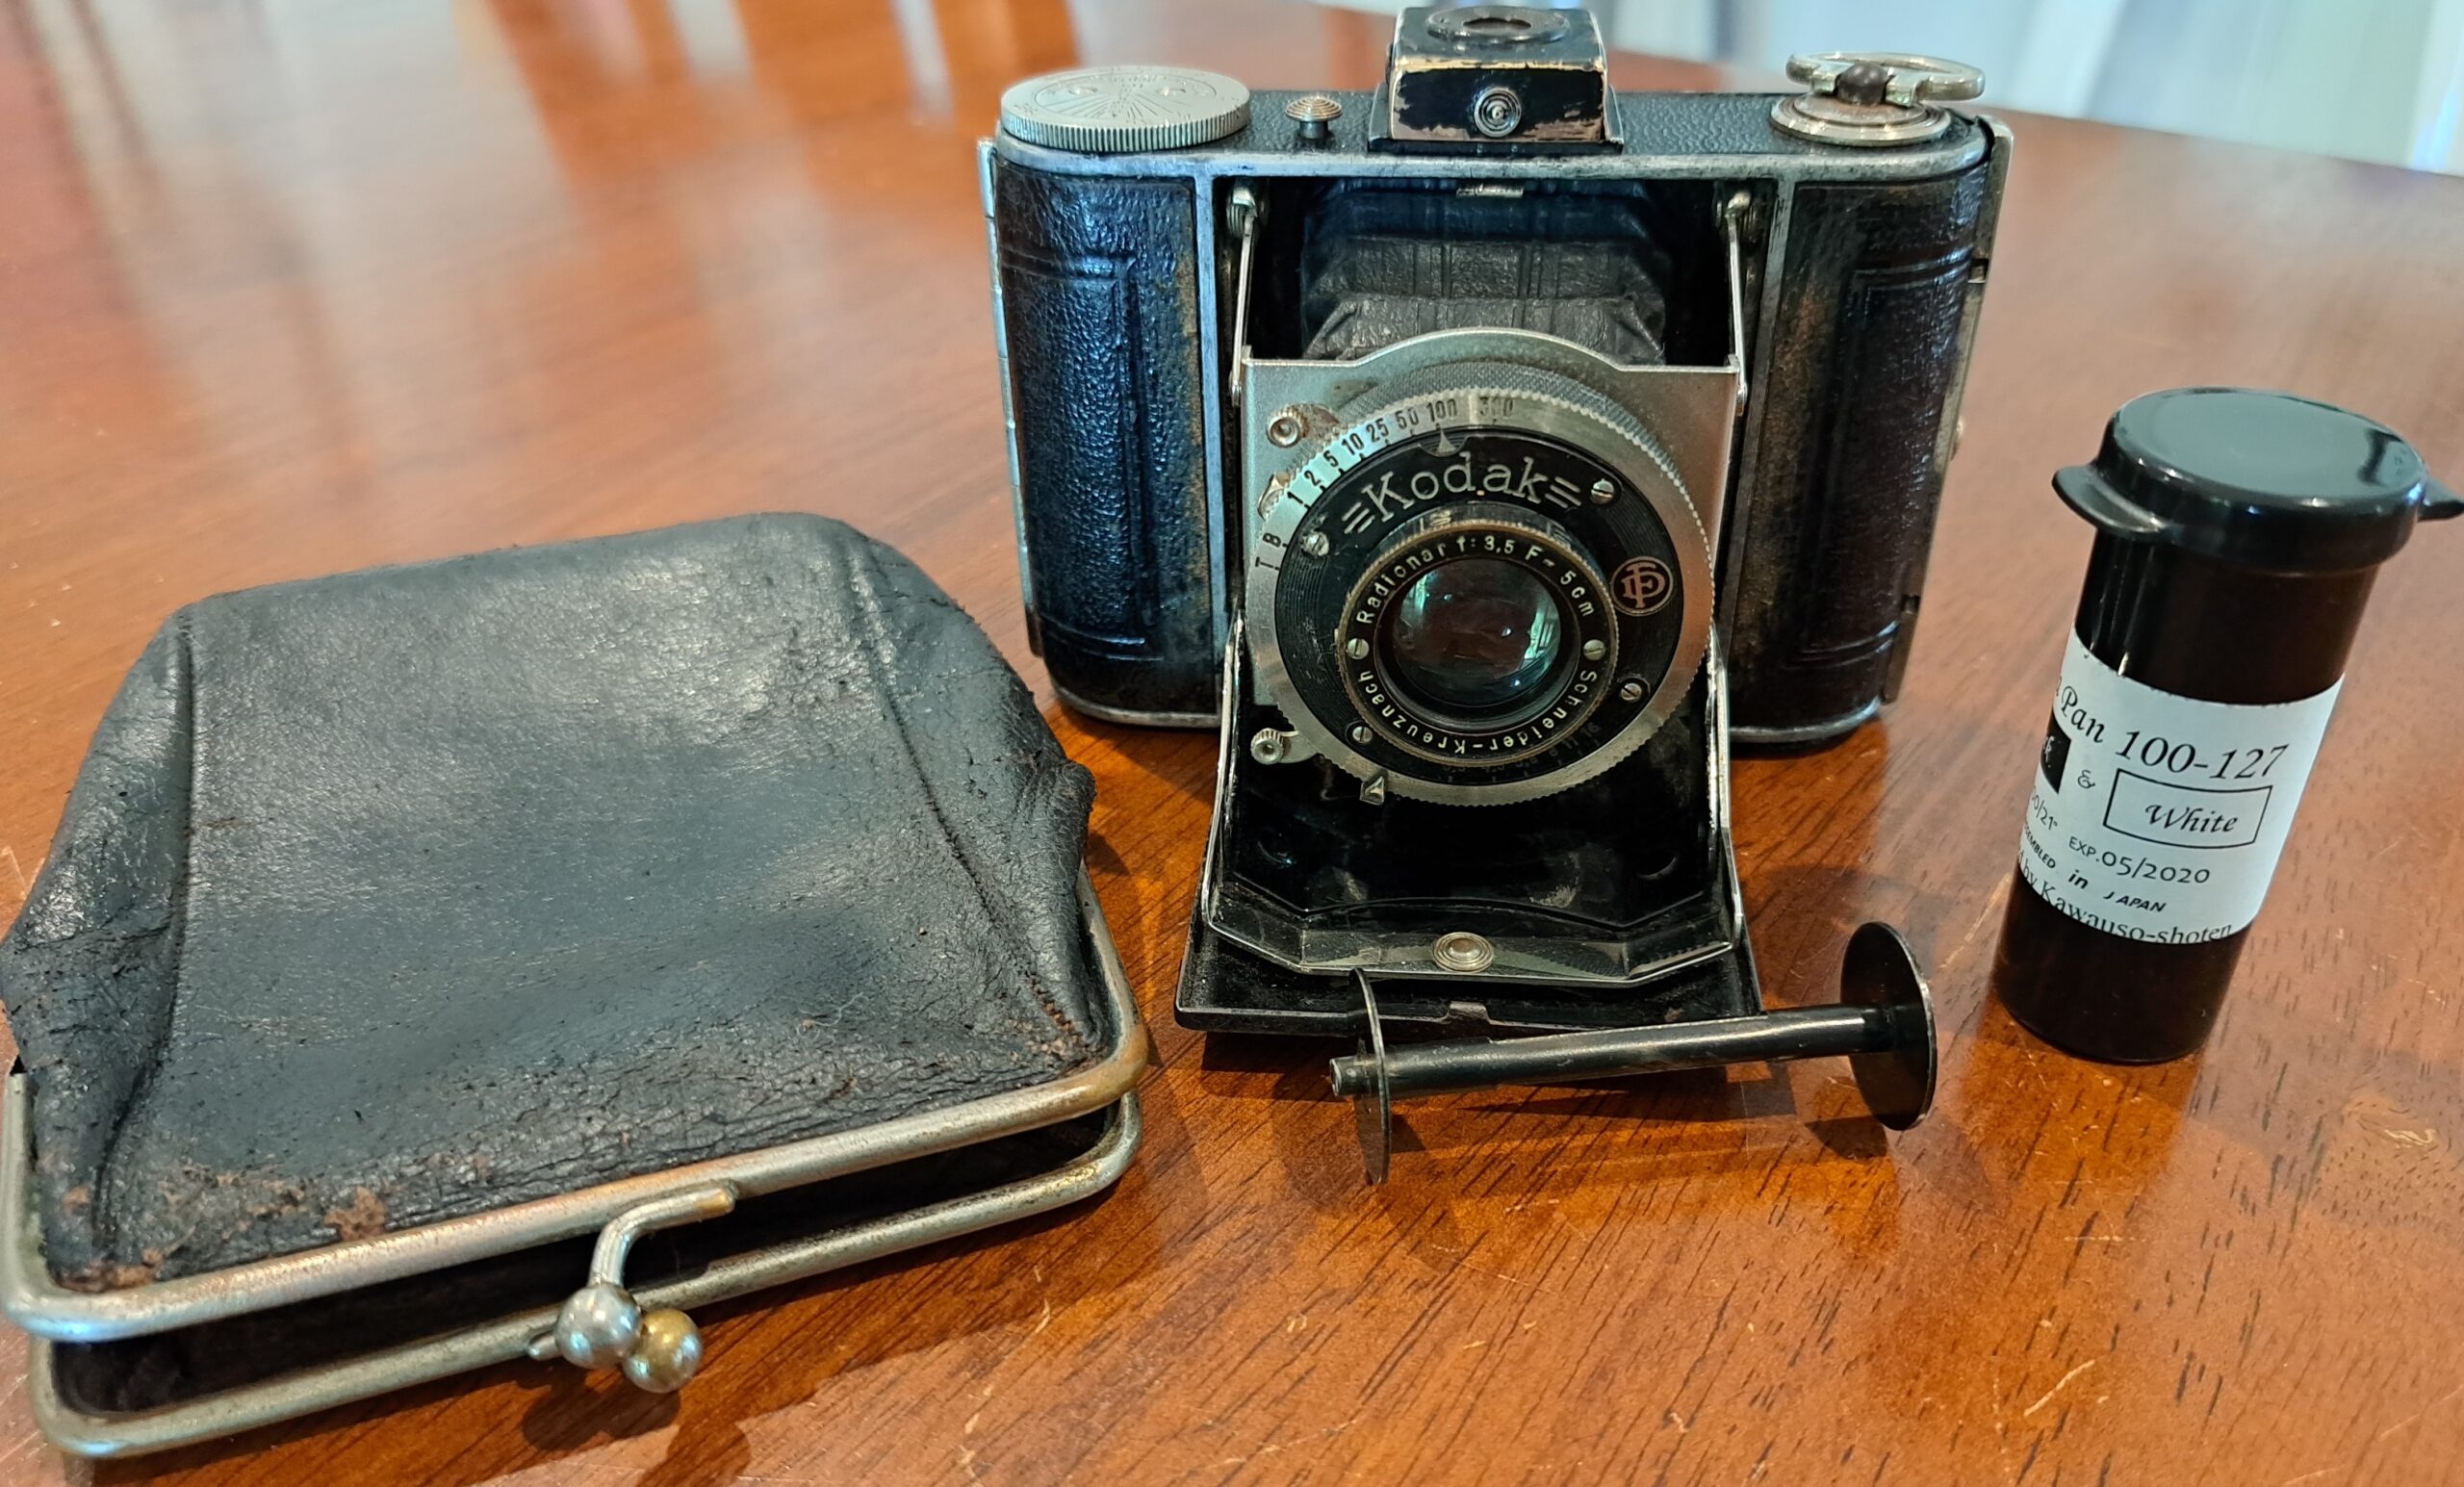 Small vintage fold out camera next to a purse (which it fits into) and a roll of ReraPan 100-127 film in a black canister.